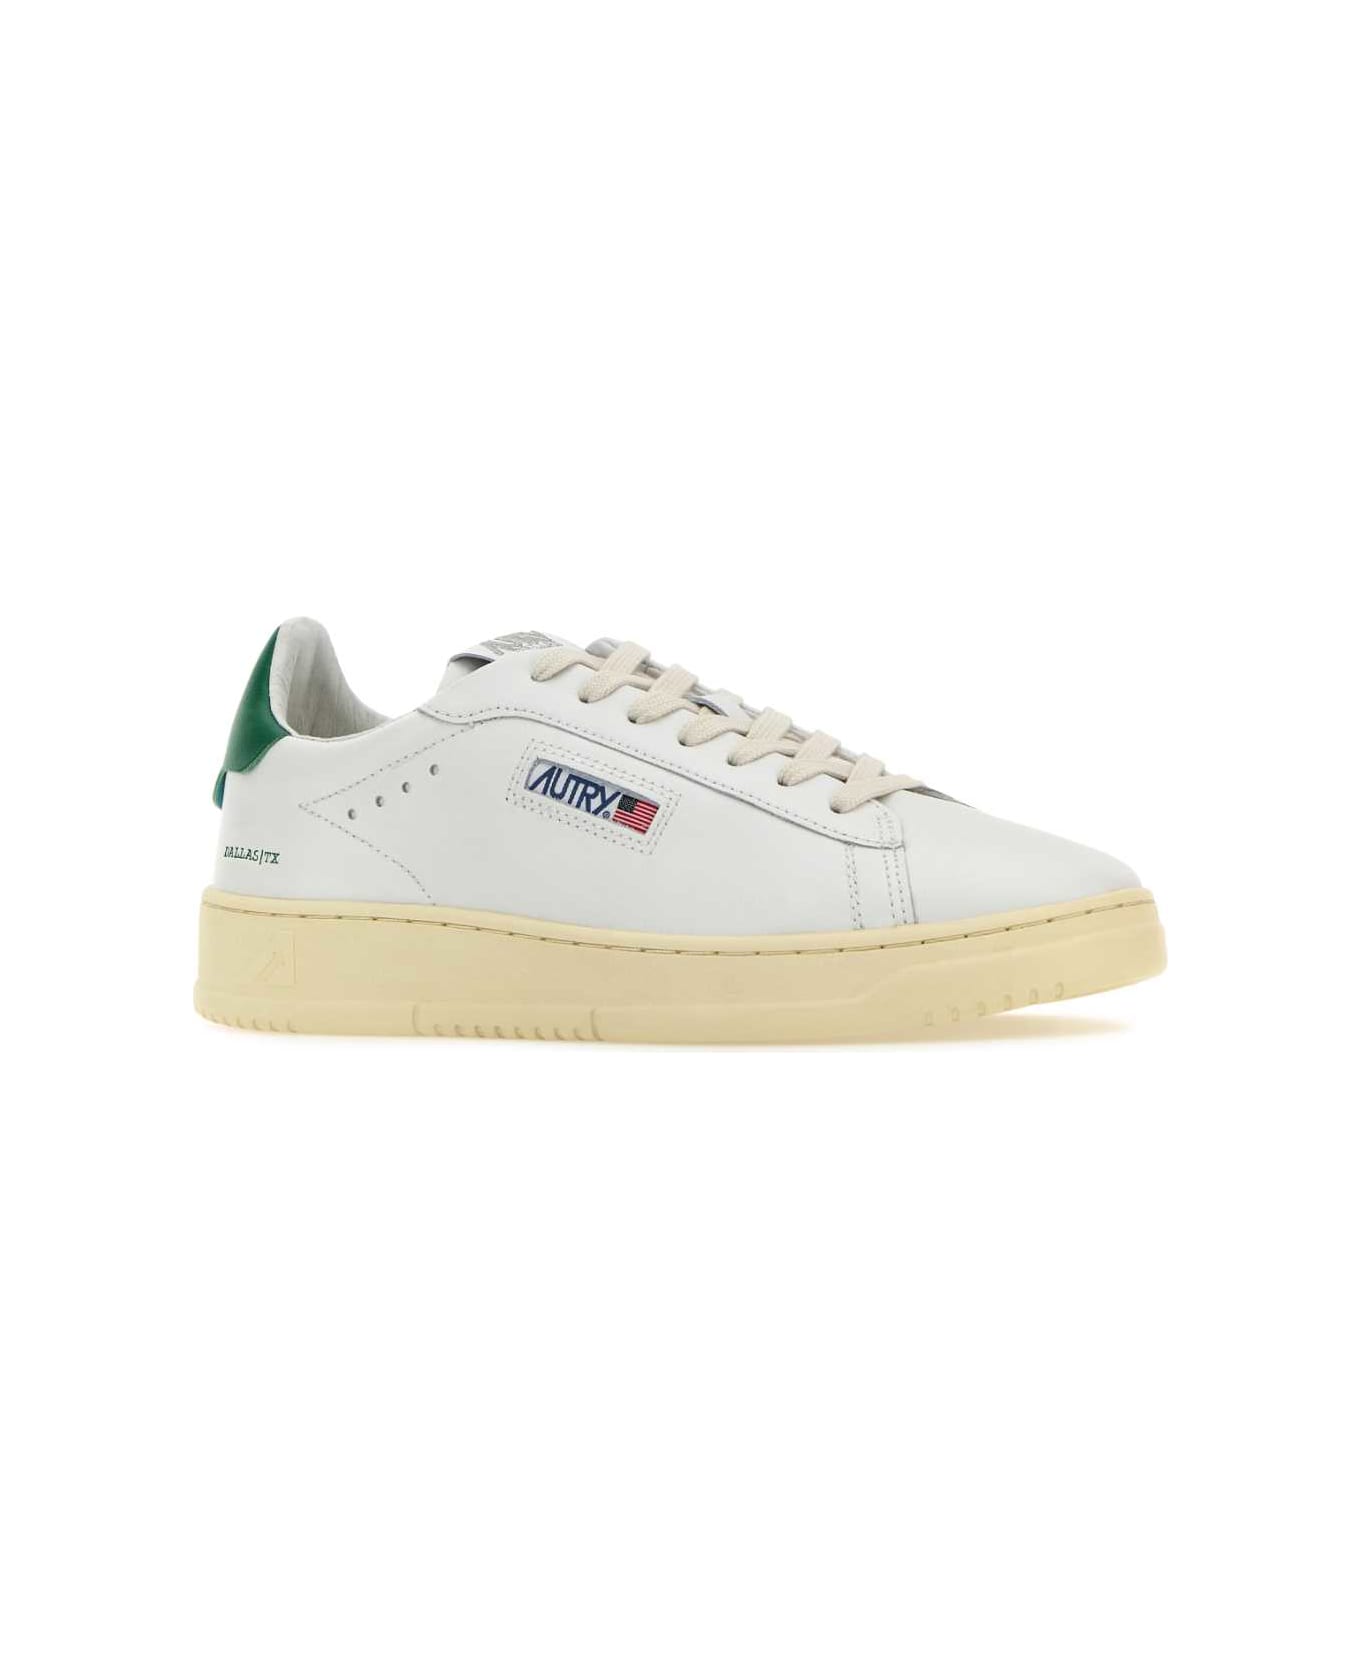 Autry White Leather Dallas Sneakers - NW02